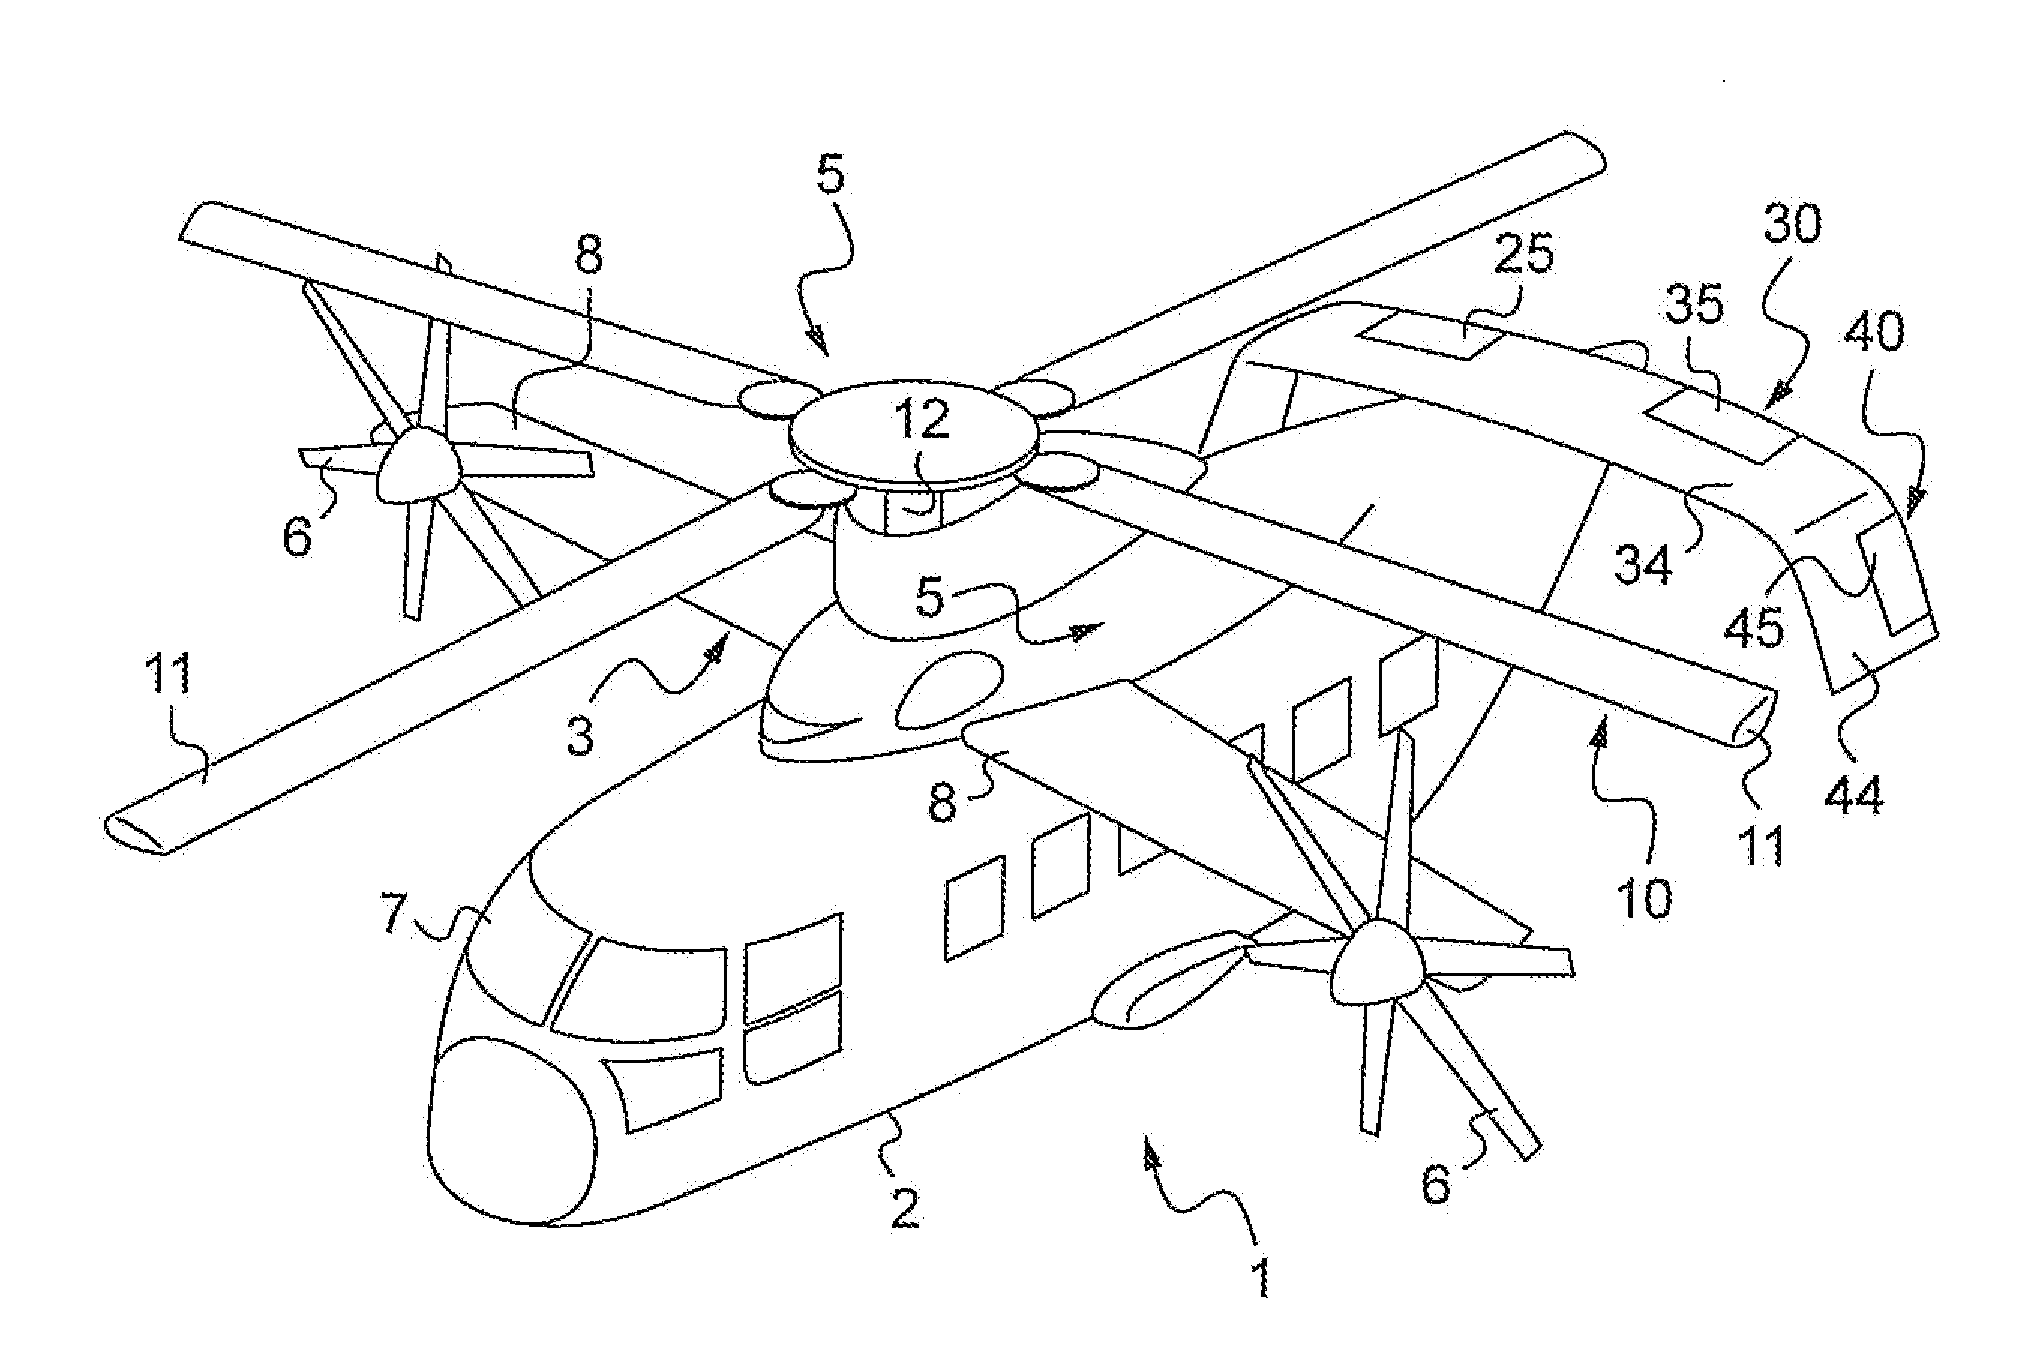 Fast hybrid helicopter with long range